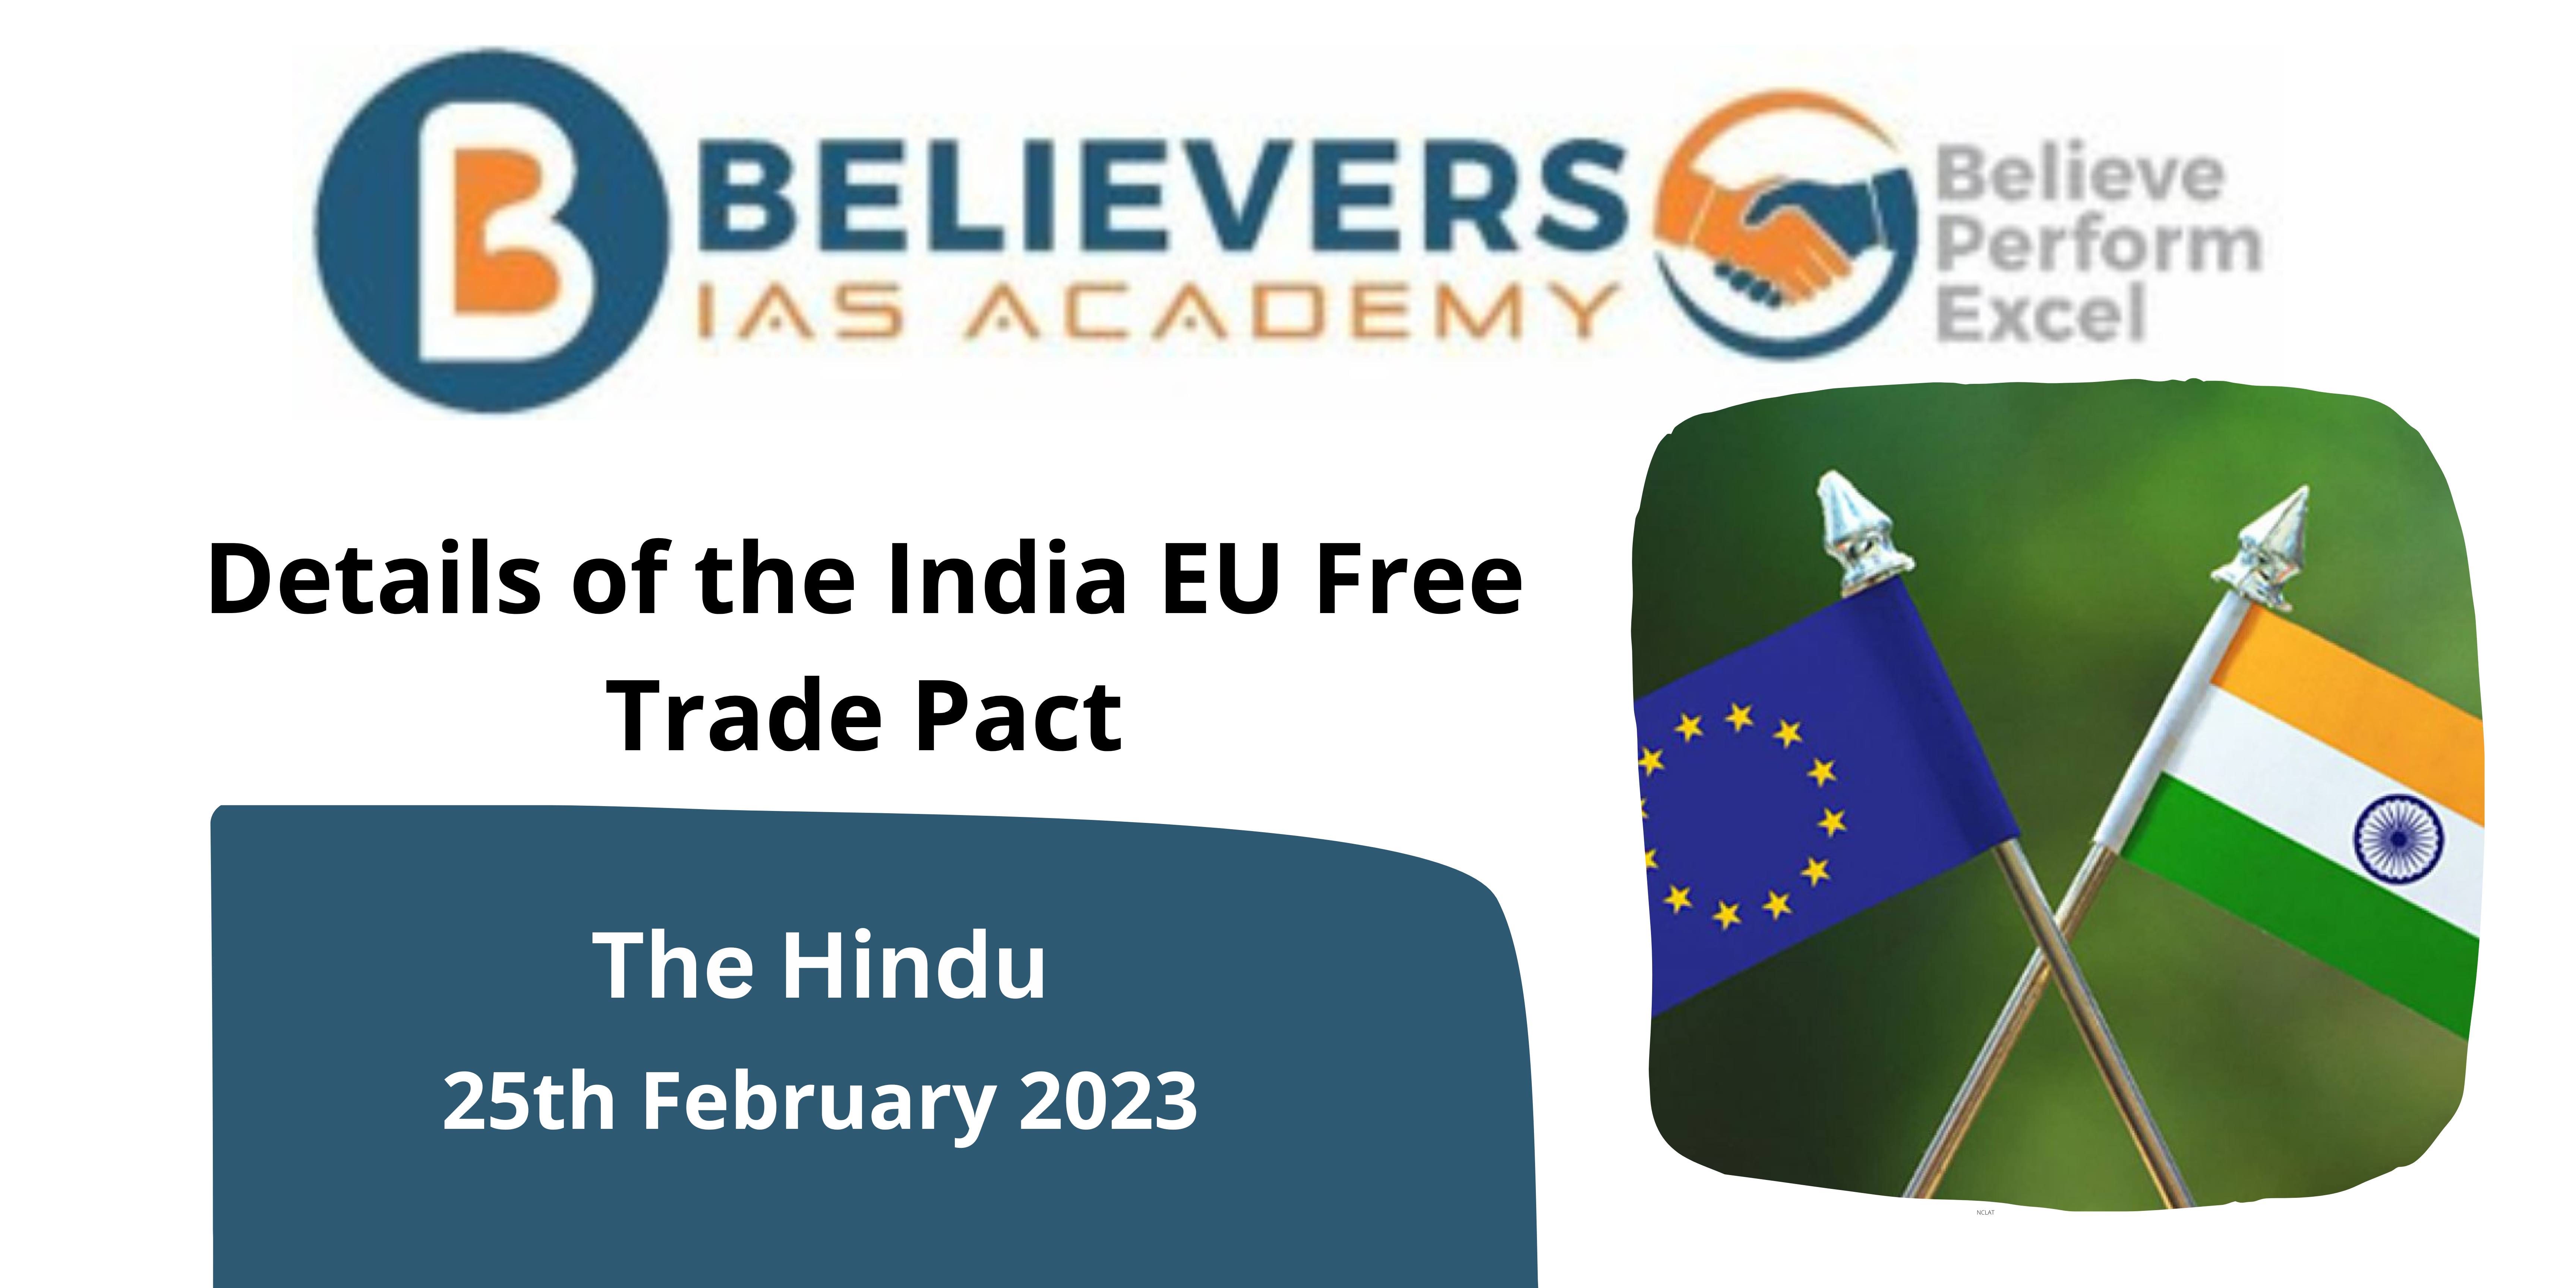 Details of the India EU Free Trade Pact